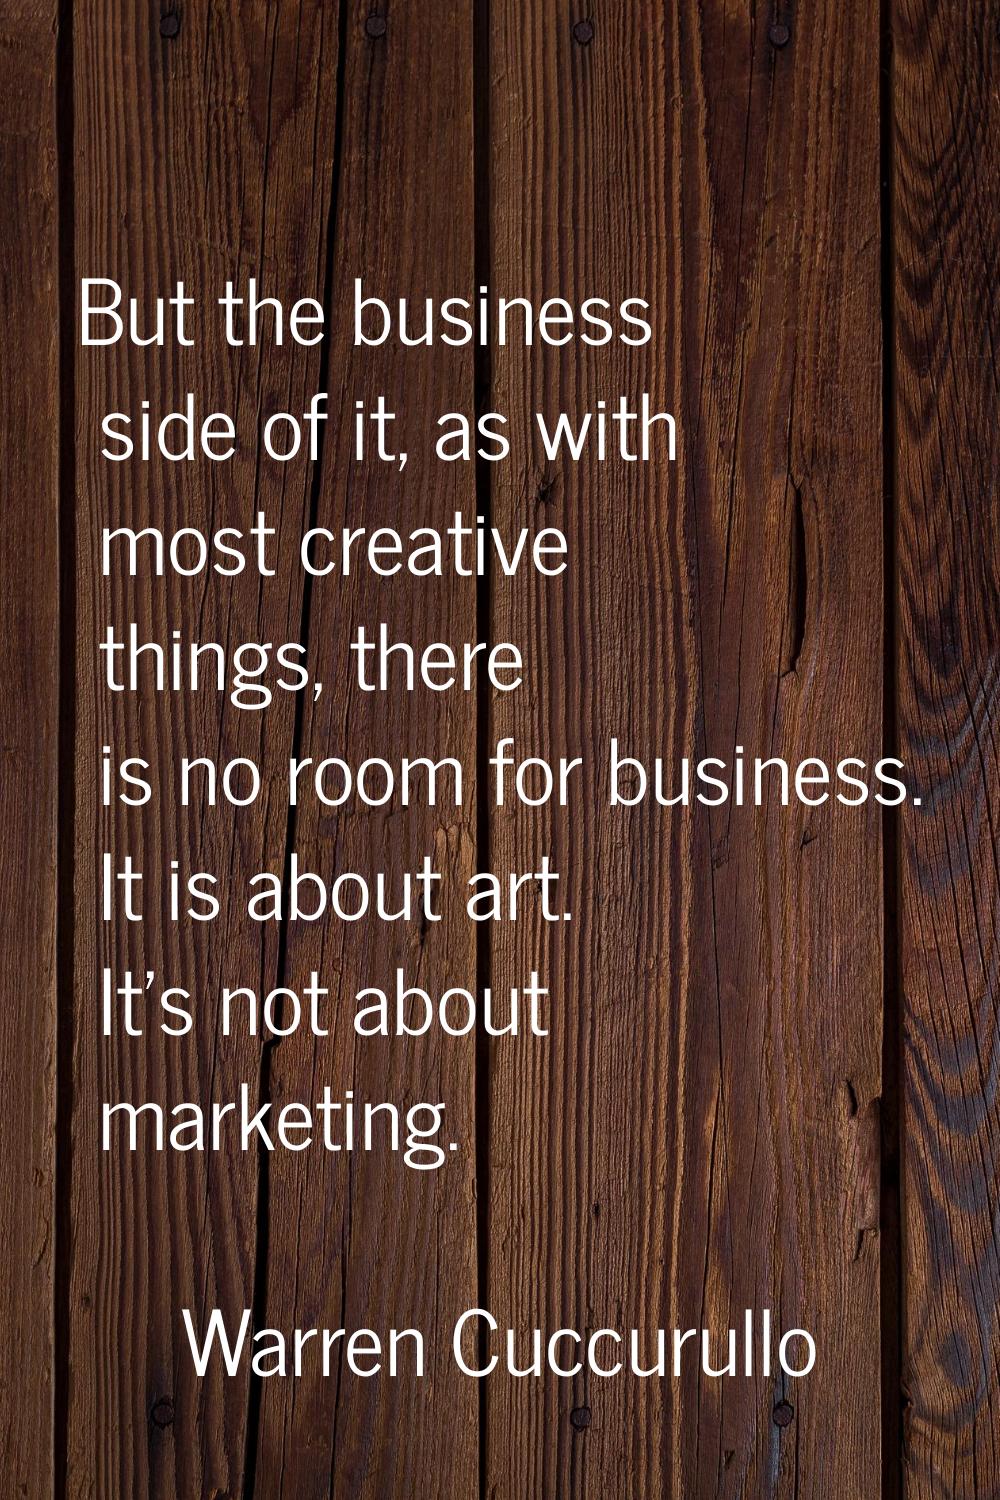 But the business side of it, as with most creative things, there is no room for business. It is abo